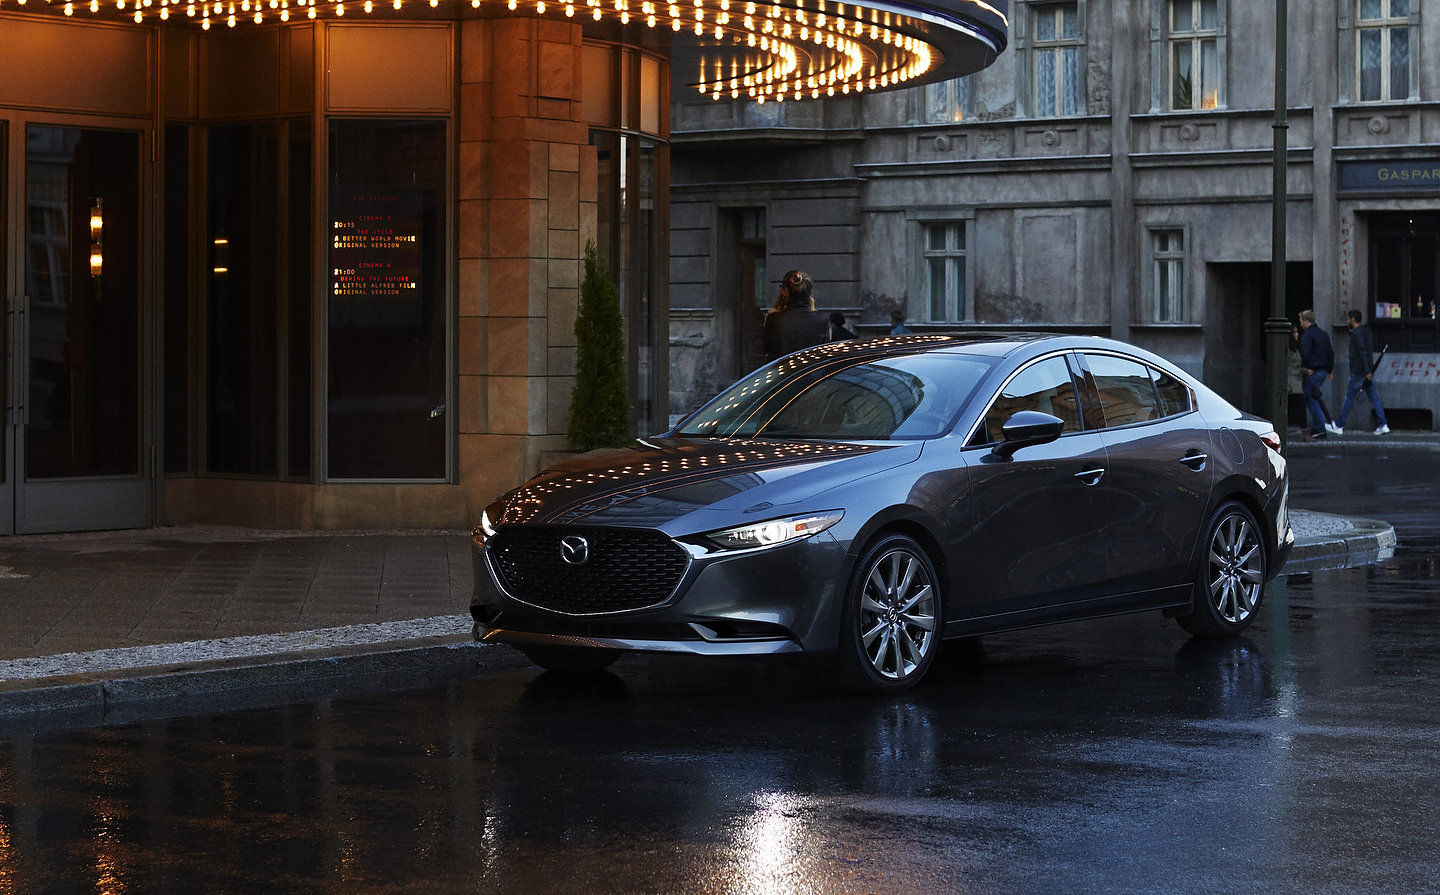 The new 2019 Mazda3 can be equipped with all-wheel-drive for the ultimate in 4-season driving fun